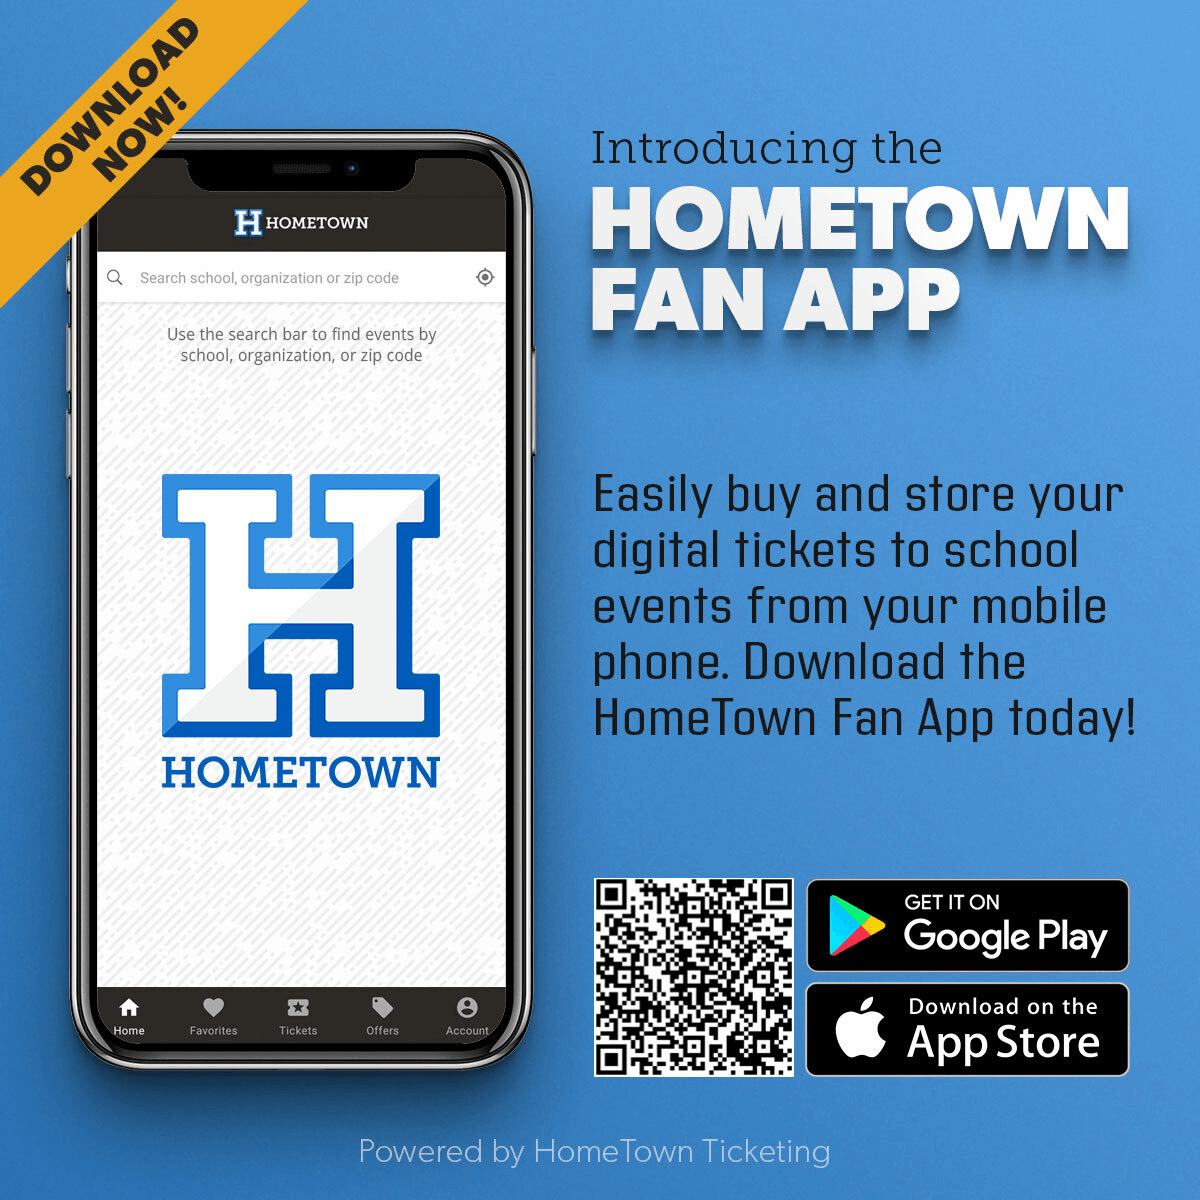 Buy Event Tickets for your favorite high school games with the HomeTown Fan App. Now you can easily buy and store your digital tickets to events from your mobile phone with the HomeTown Fan App, available for both iOS and Android devices.